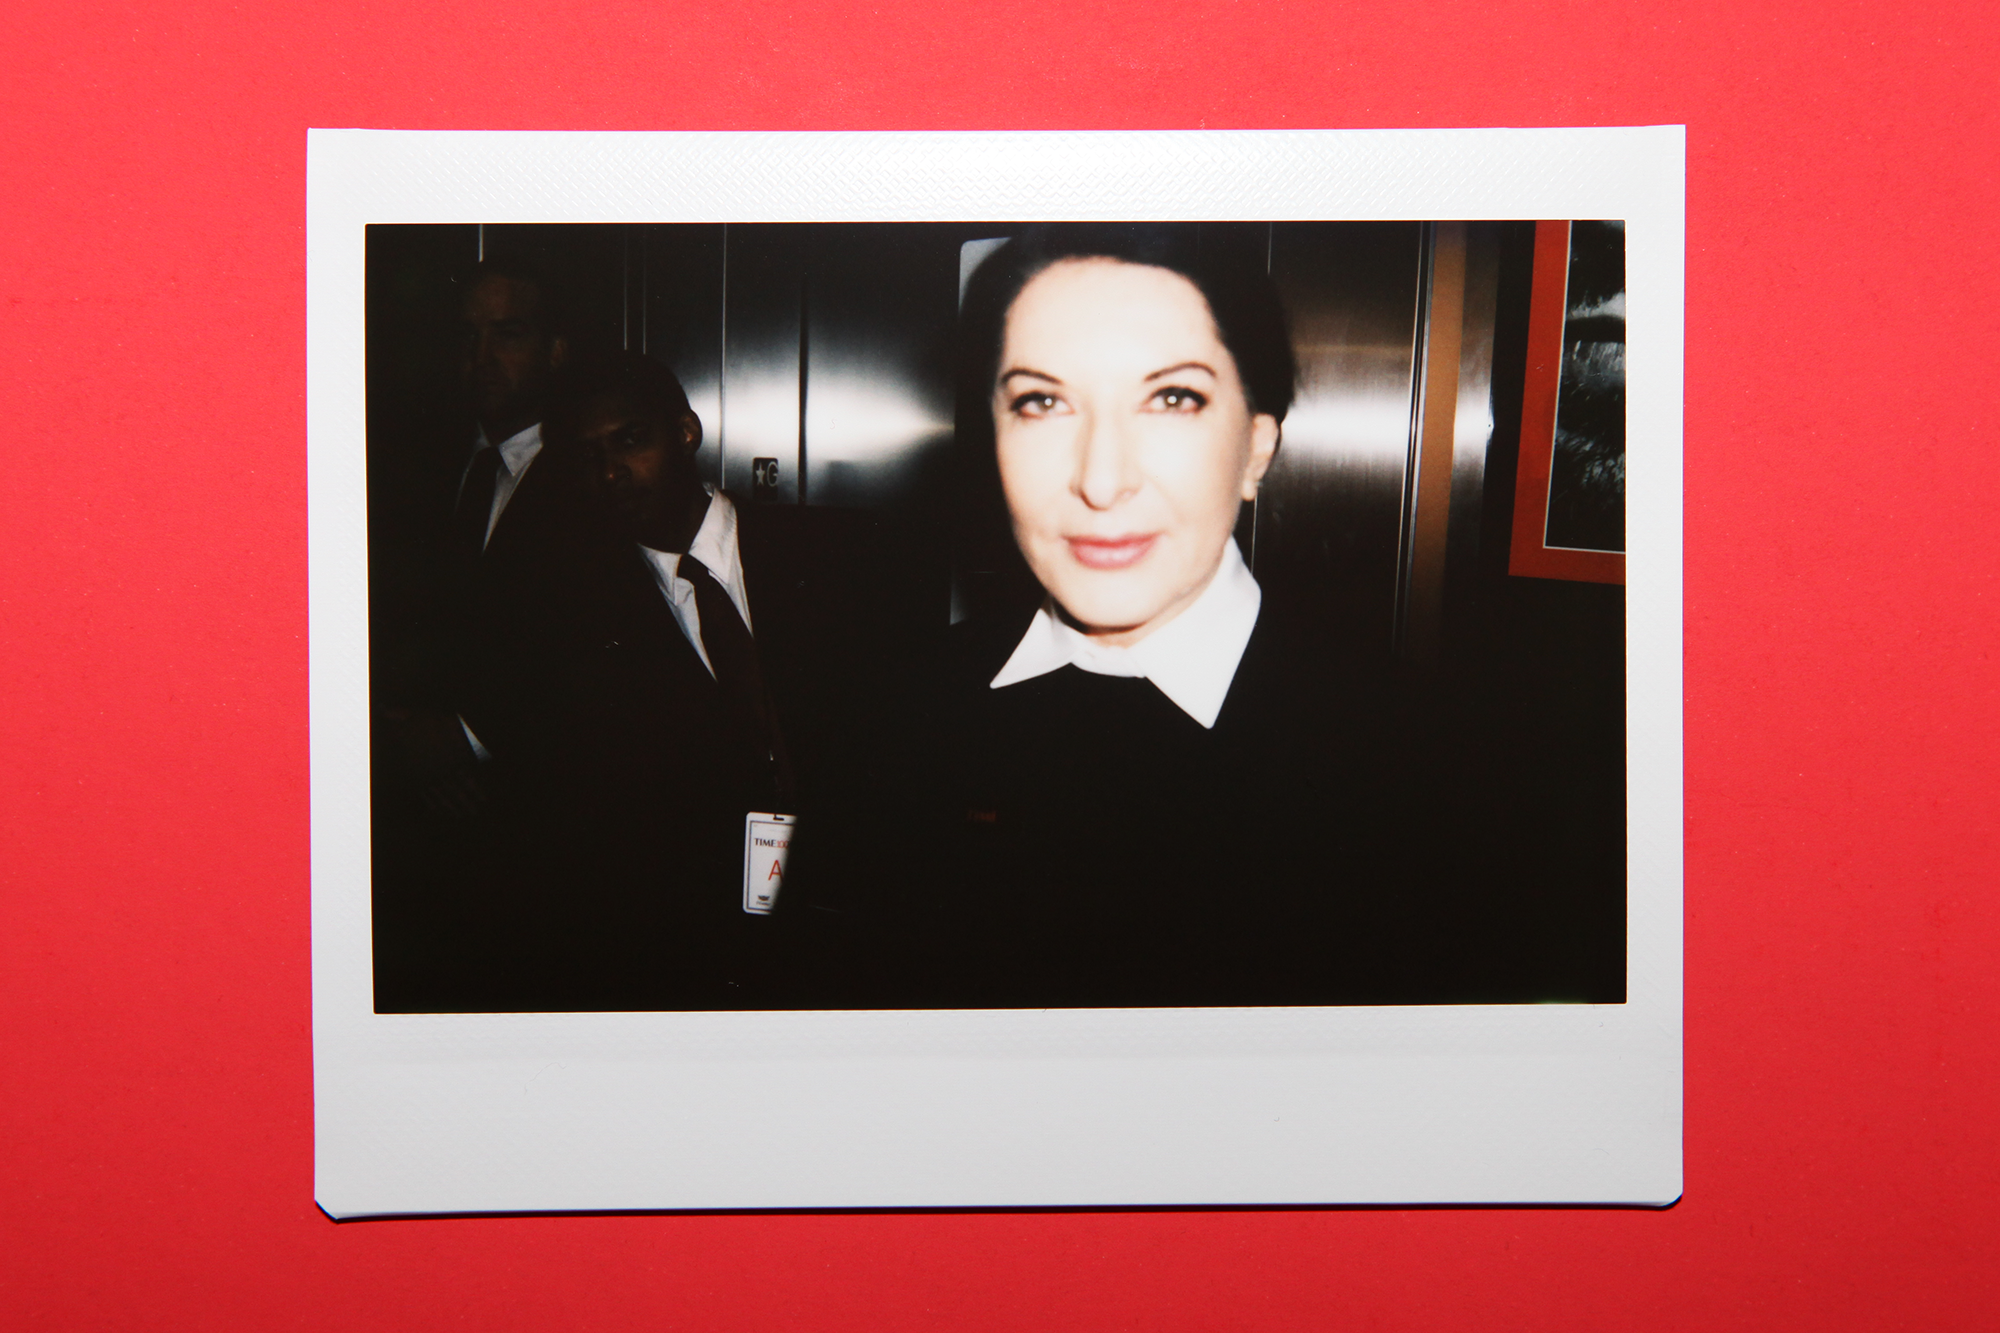 Marina Abramović arrives at the TIME 100 Gala at the Time Warner Center on April 26, 2016 in New York City.